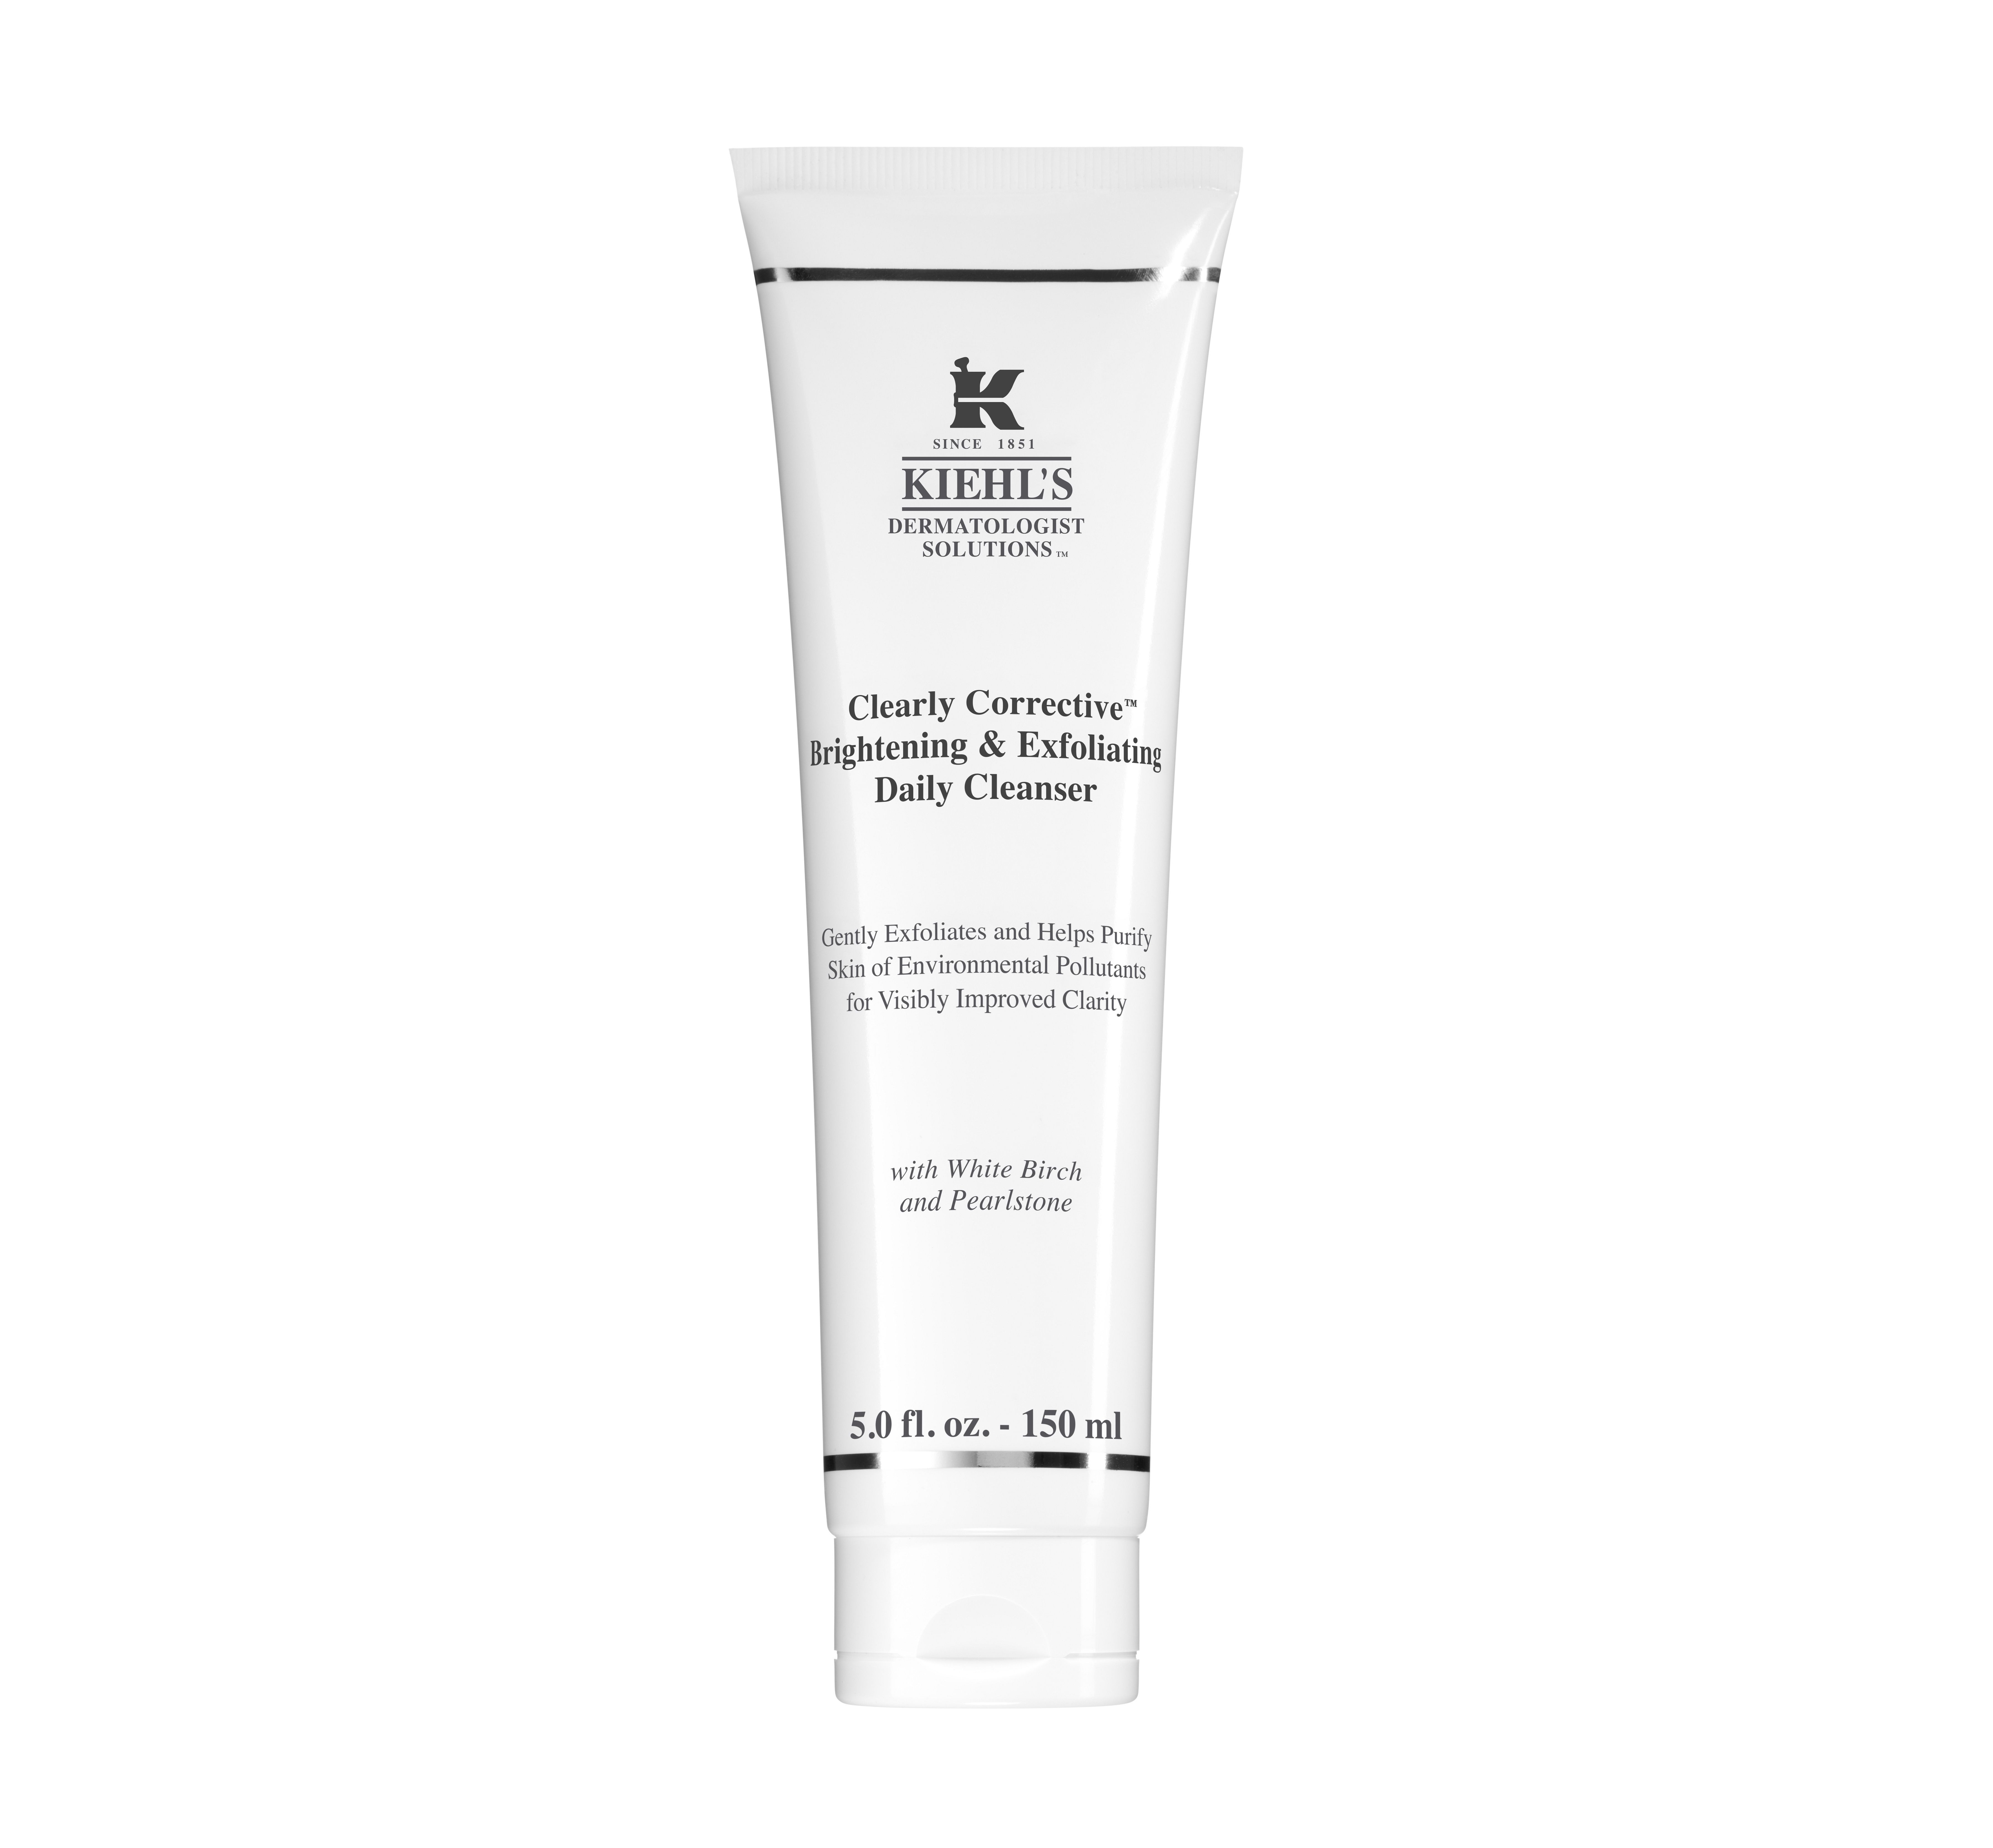 Kiehl's Clearly Corrective Brightening & Exfoliating Daily Cleanse